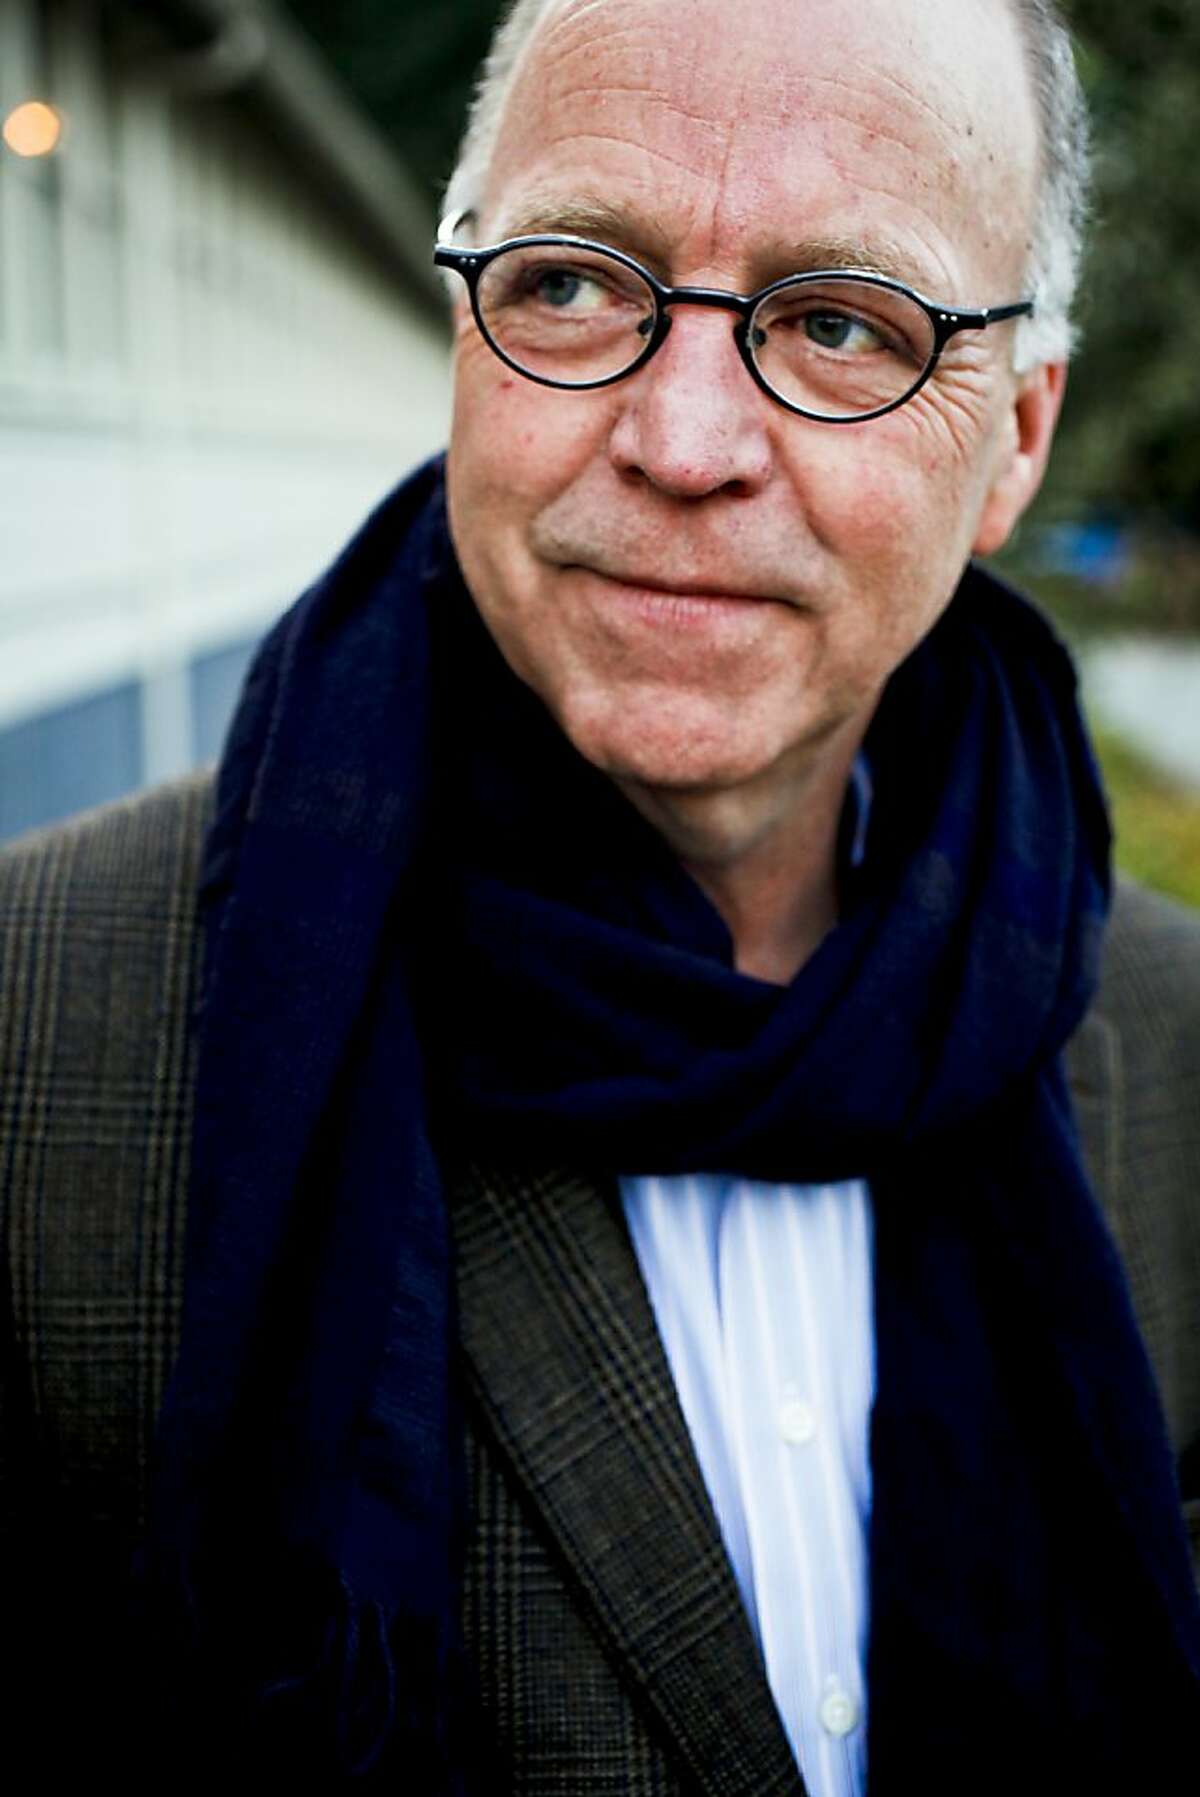 Bingham Ray, seen in San Francisco, Calif., on Wednesday, Dec. 14, 2011, is the new director of The San Francisco Film Festival.